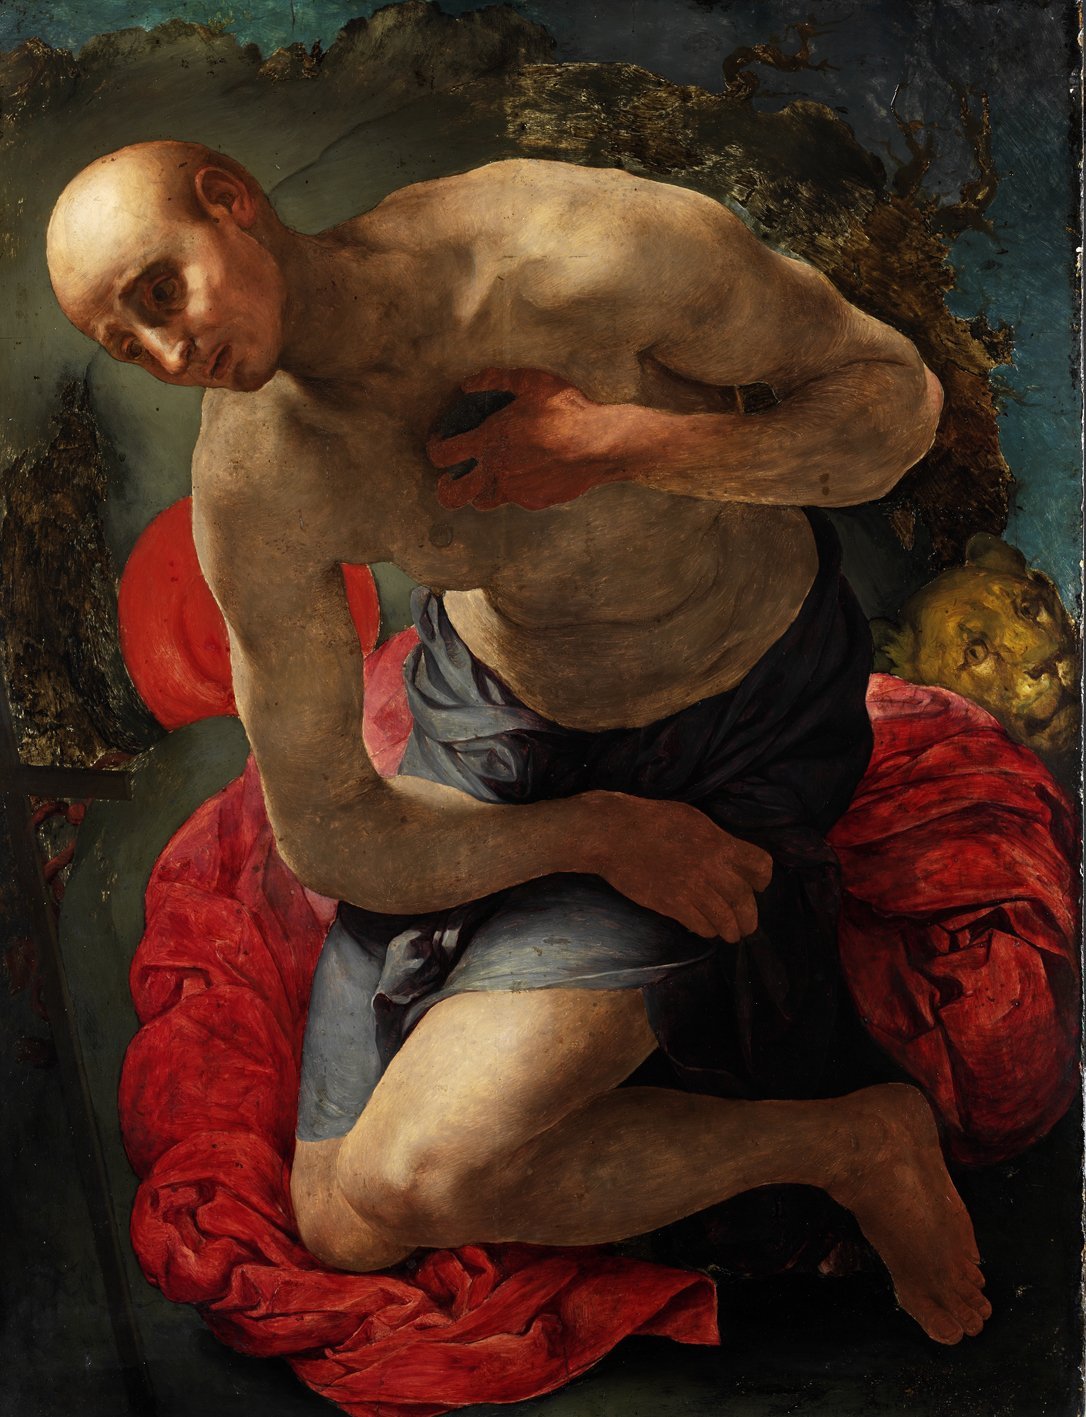 Pontormo (Jacopo Carucci; Pontorme, Empoli 1494 - Florence 1557), "Saint Jerome Penitent”, about 1529-1530, oil on canvas, 105 x 80 cm. Hannover, Hannover Landesmuseum Niedersächsisches.